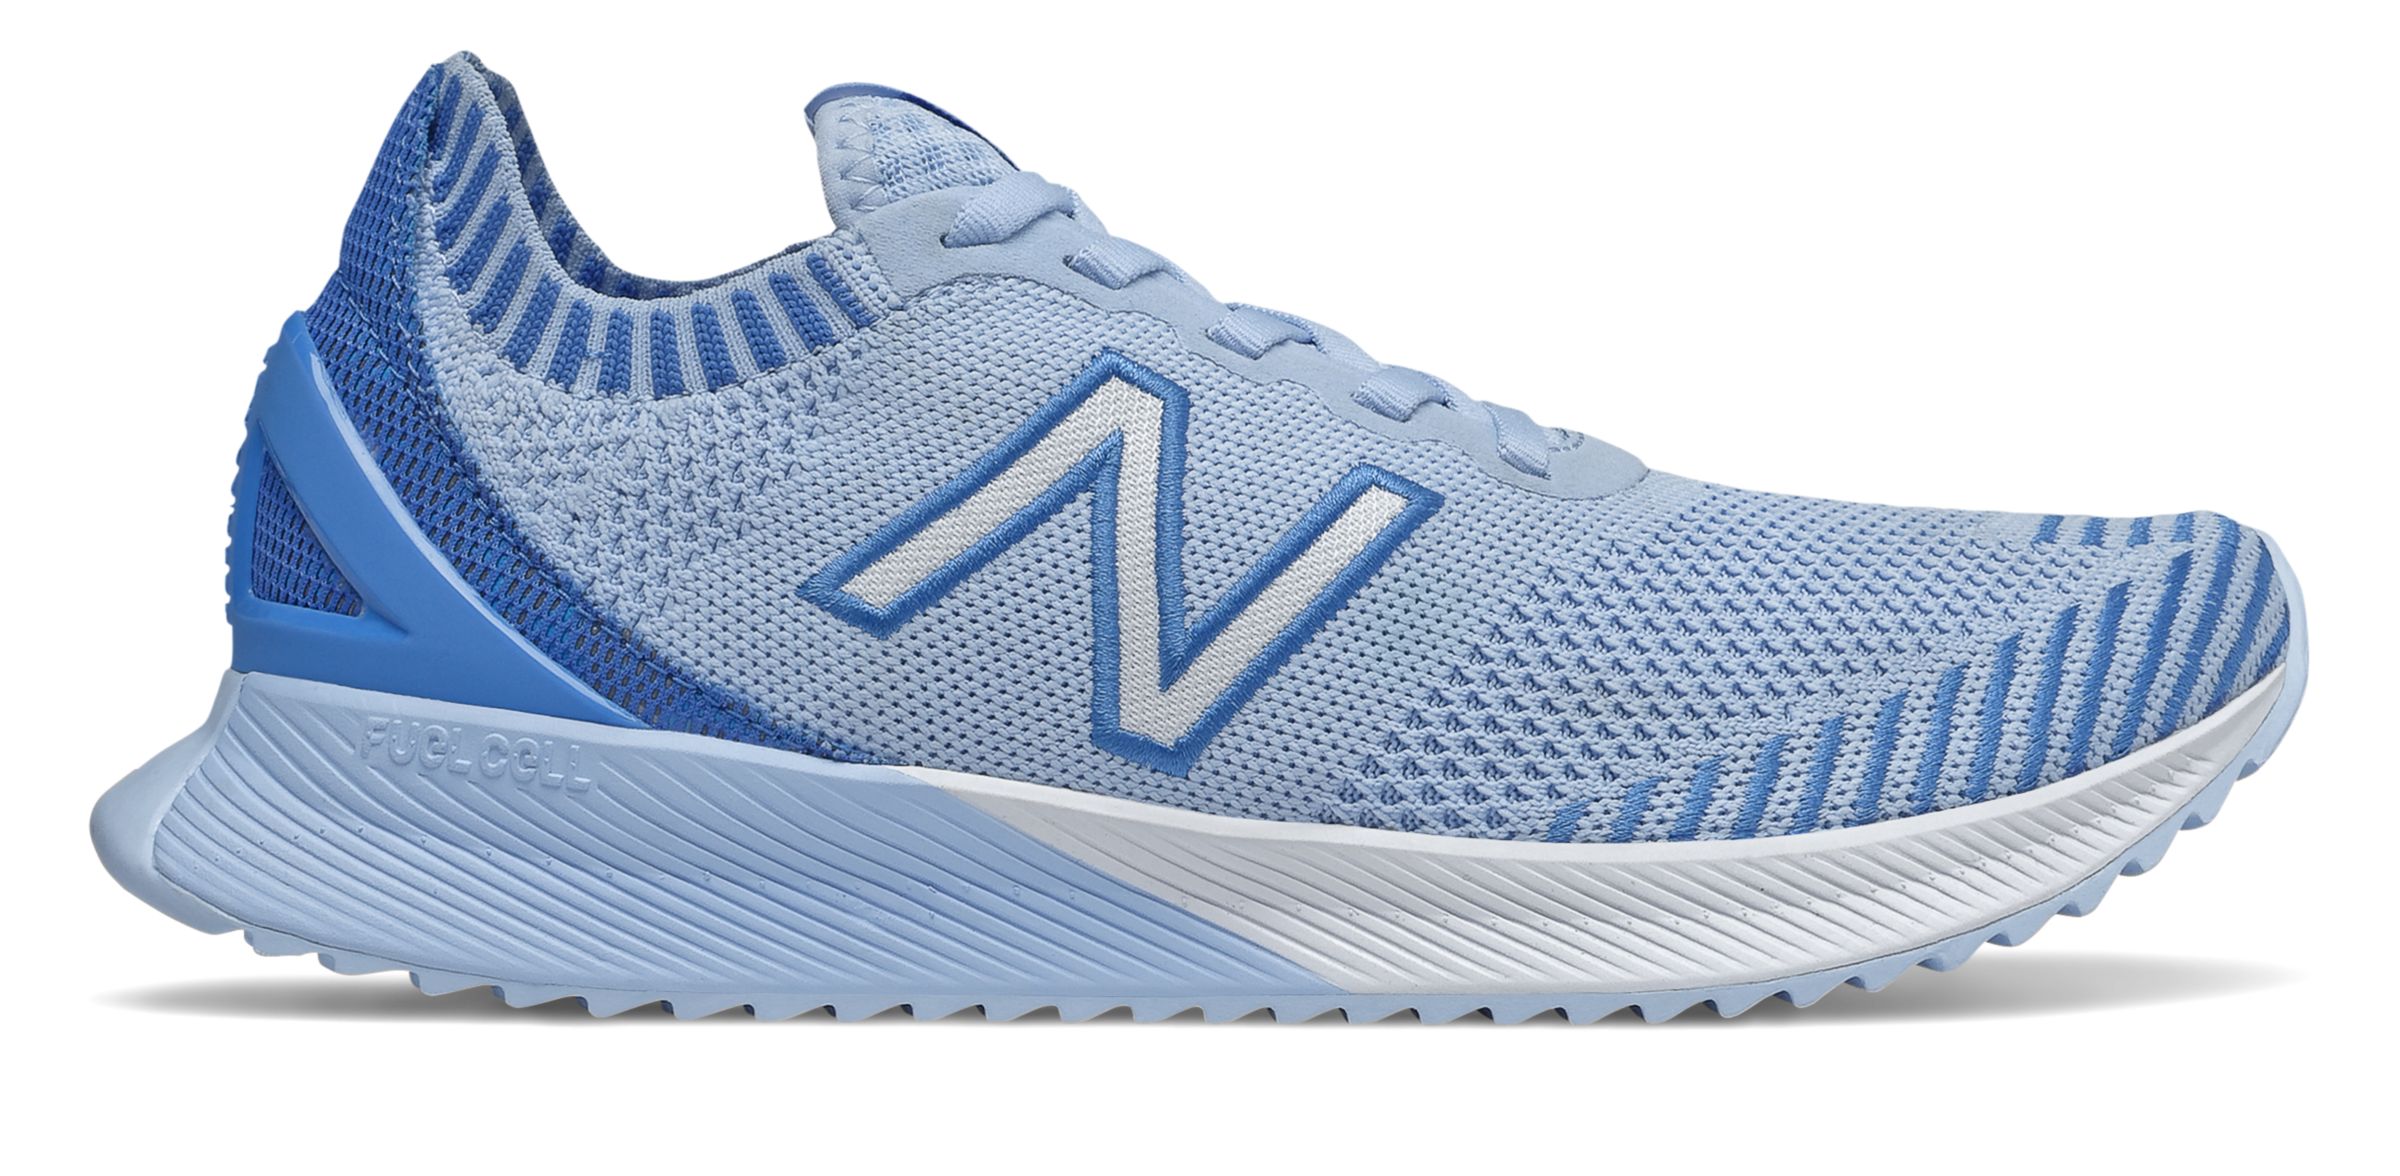 fuel cell echo new balance